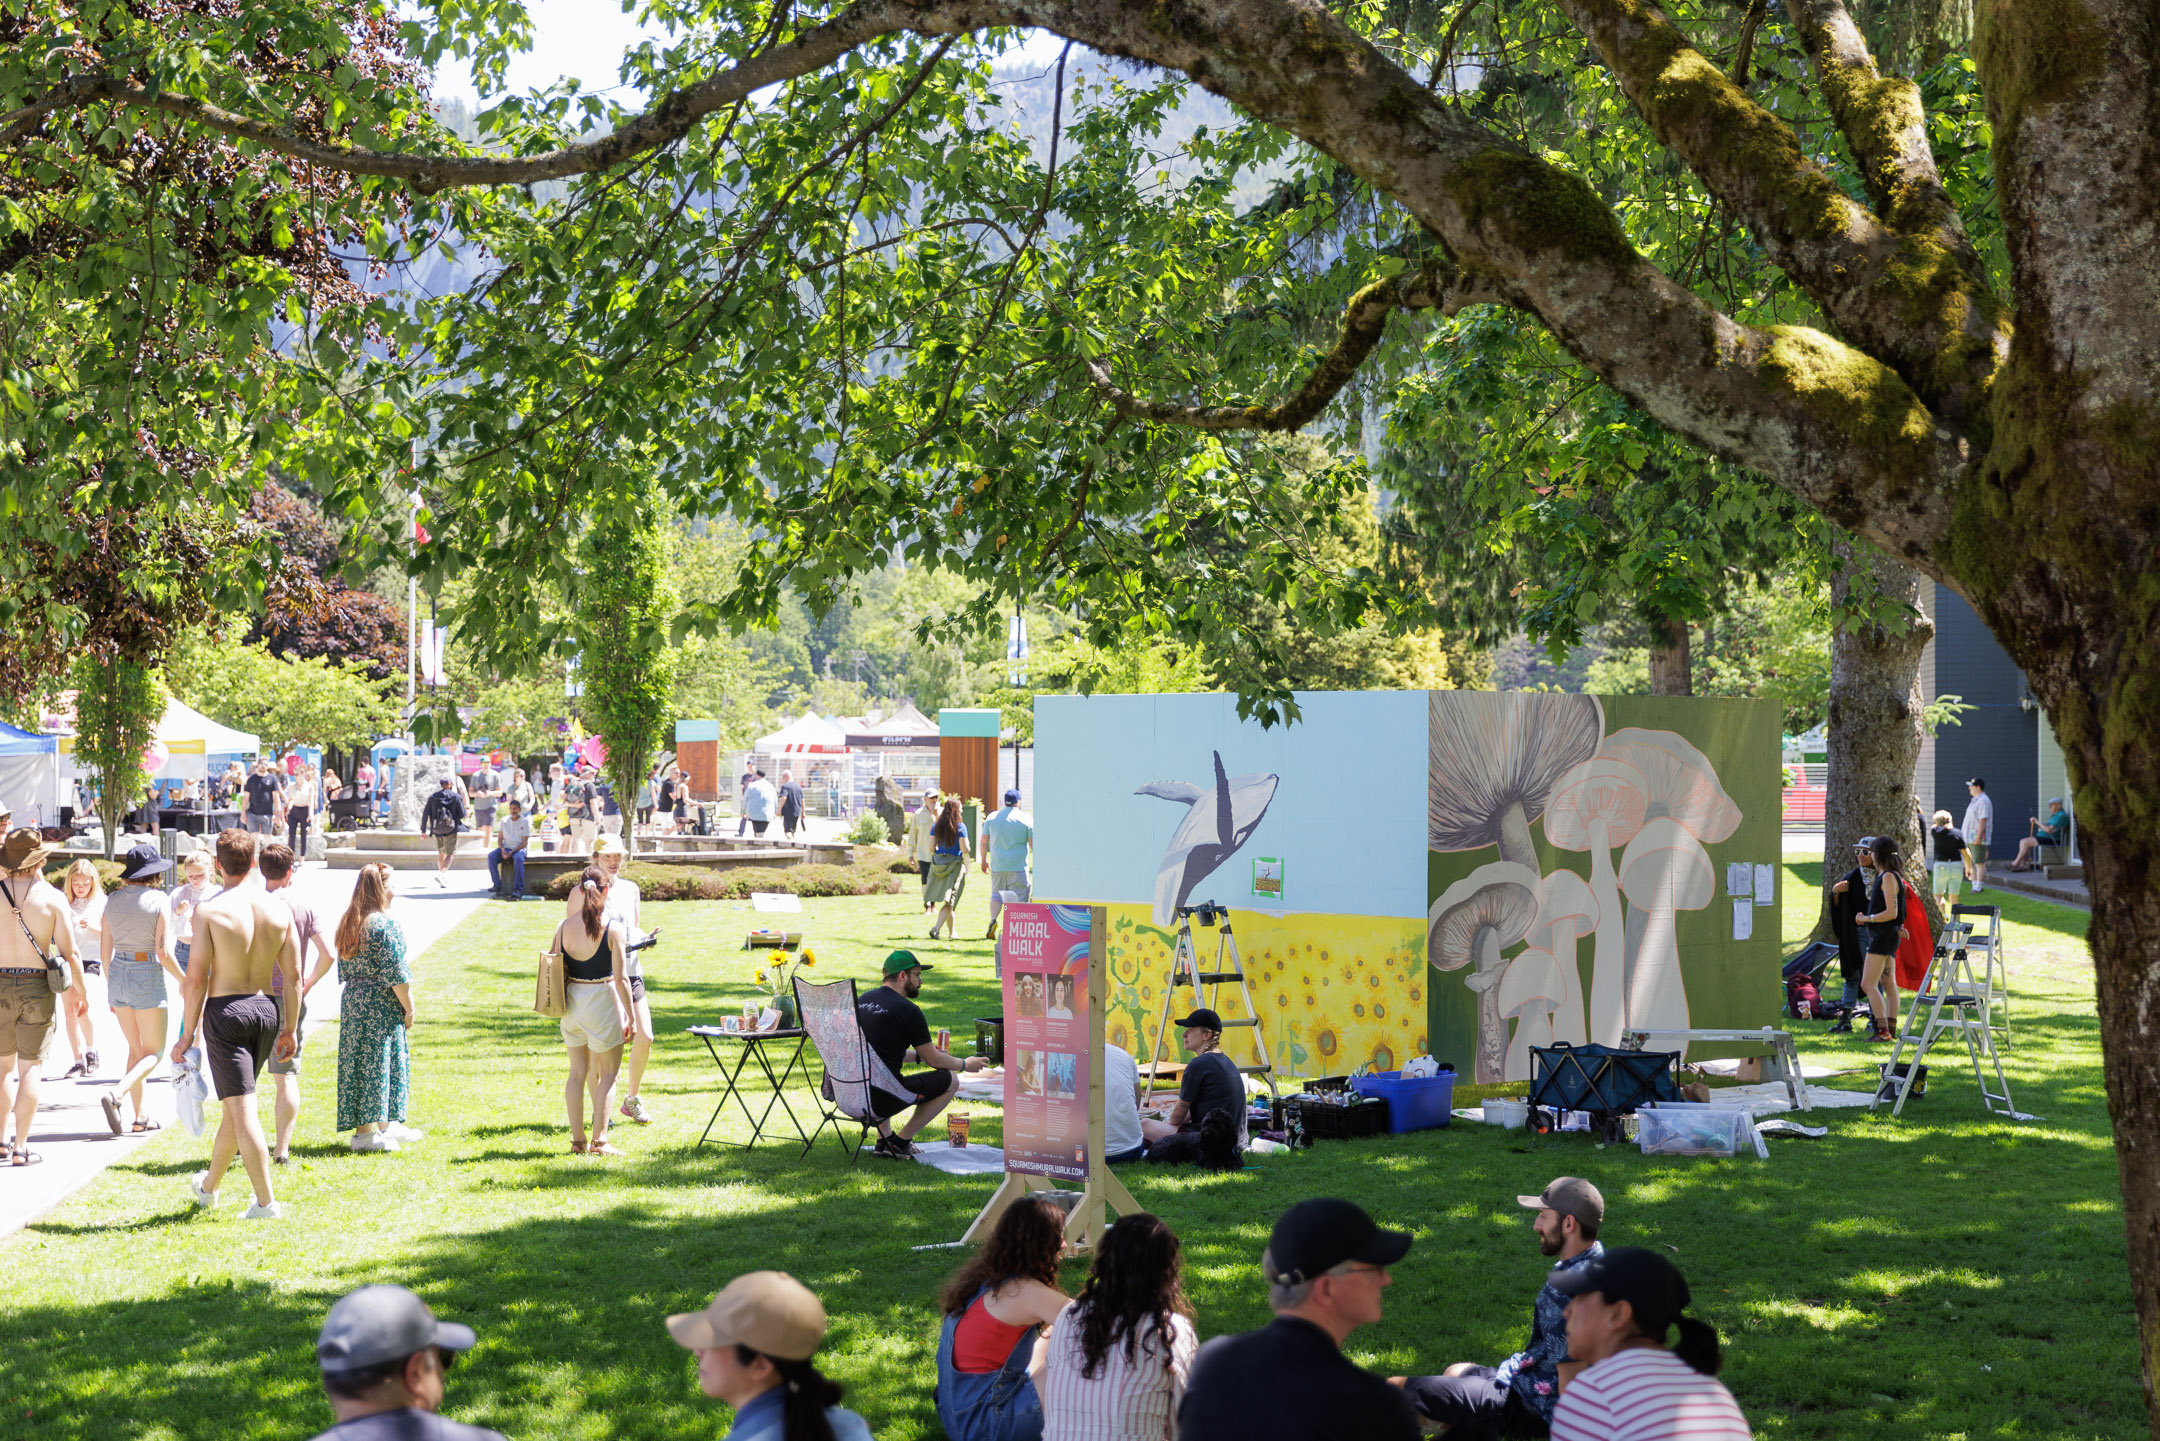 https://www.downtownsquamish.com/wp-content/uploads/2023/03/220625_Squamish-Mural-Festival-Day-2_CTP_0635.jpg